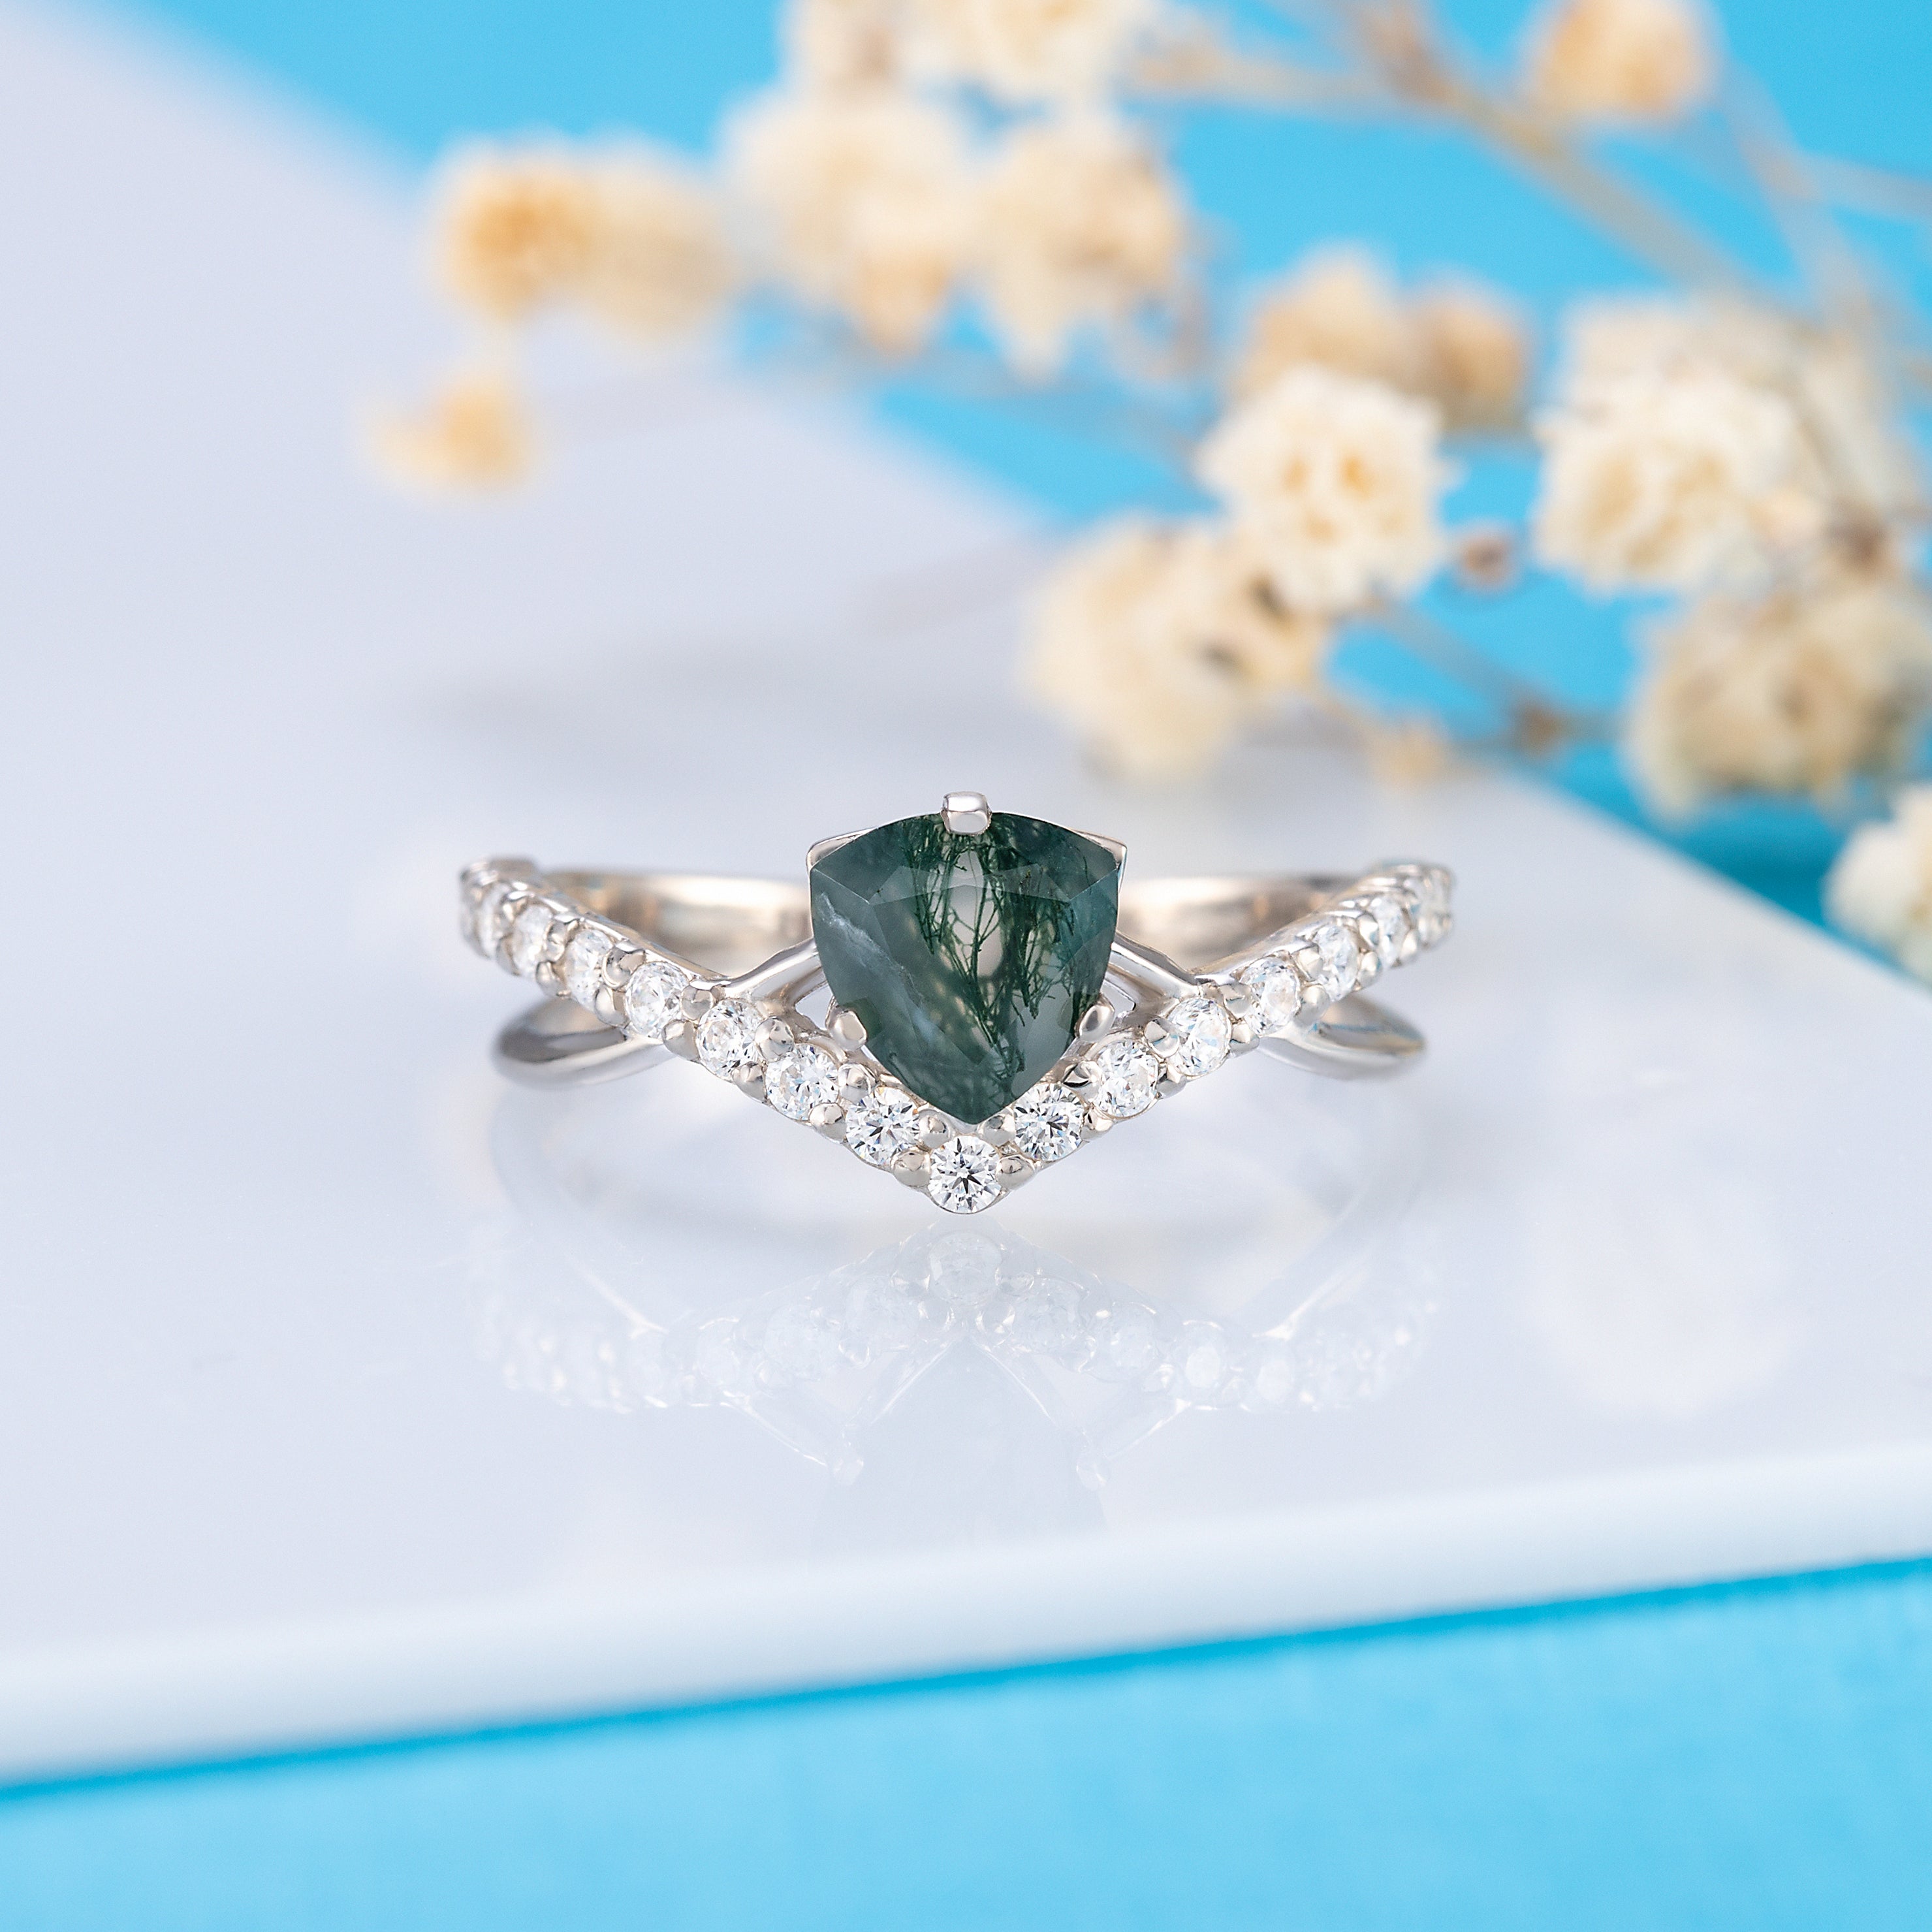 Moss agate engagement ring in 925 sterling silver – YourAsteria